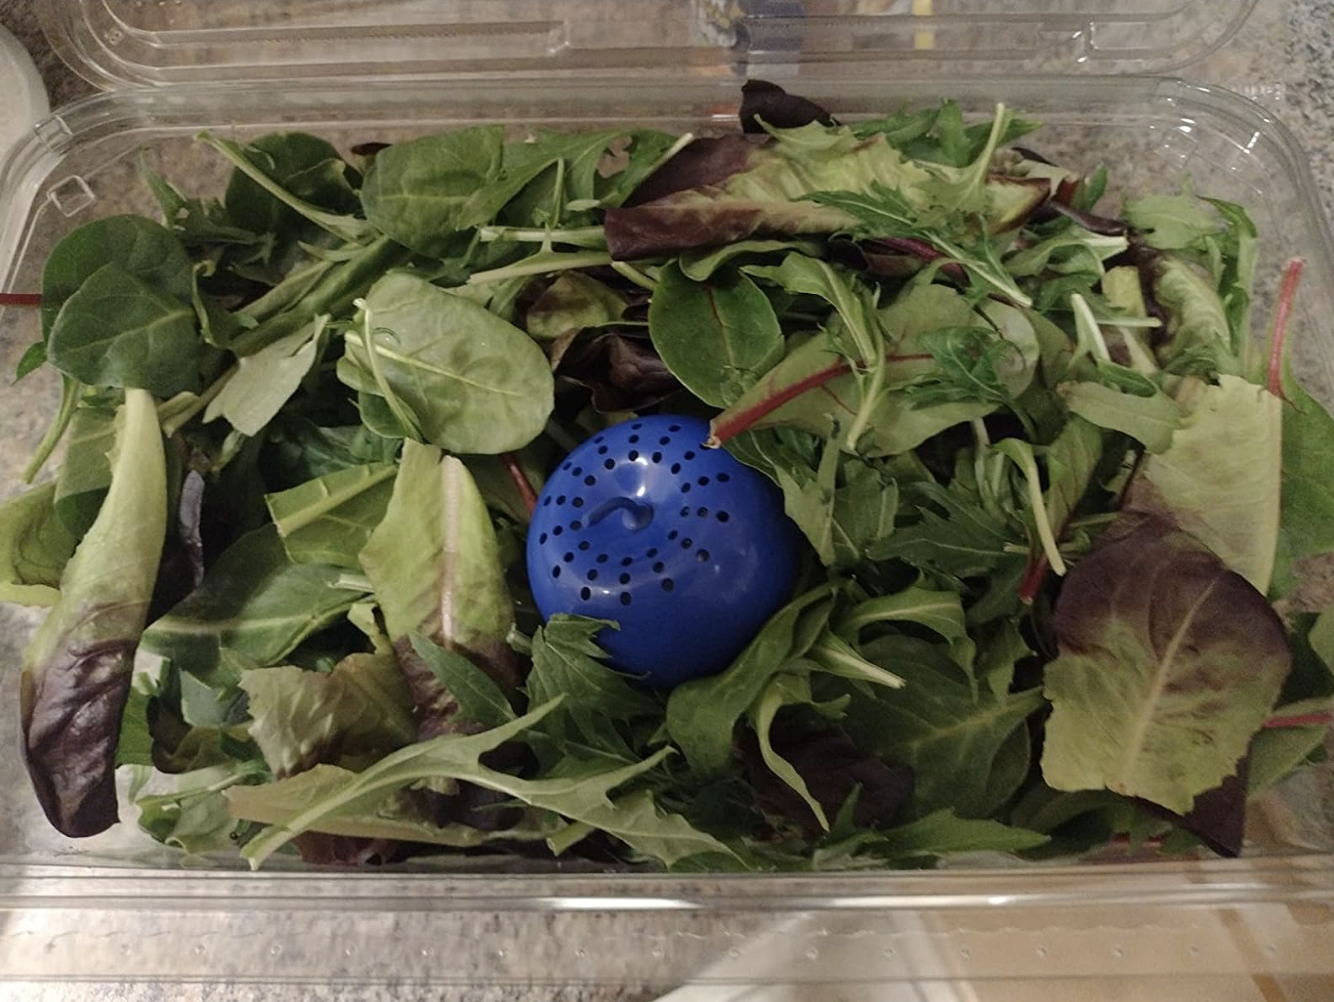 produce saver ball in container of mixed greens